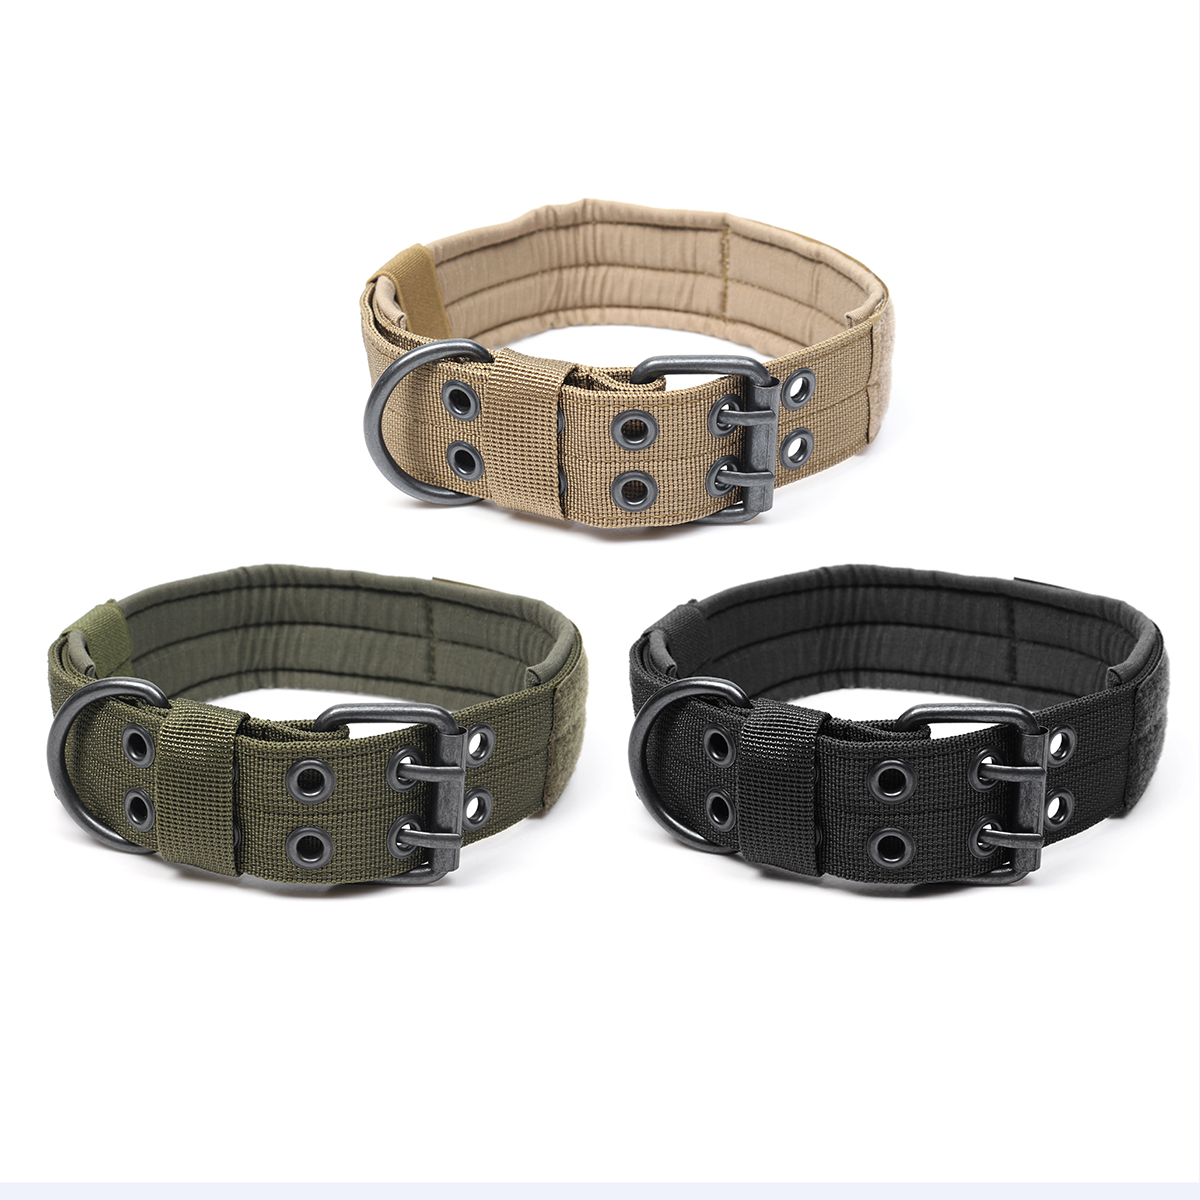 Adjustable-Training-Dog-Collar-Nylon-Tactical-Dog-Collar-Military-With-Metal-D-Ring-Buckle-1366535-3